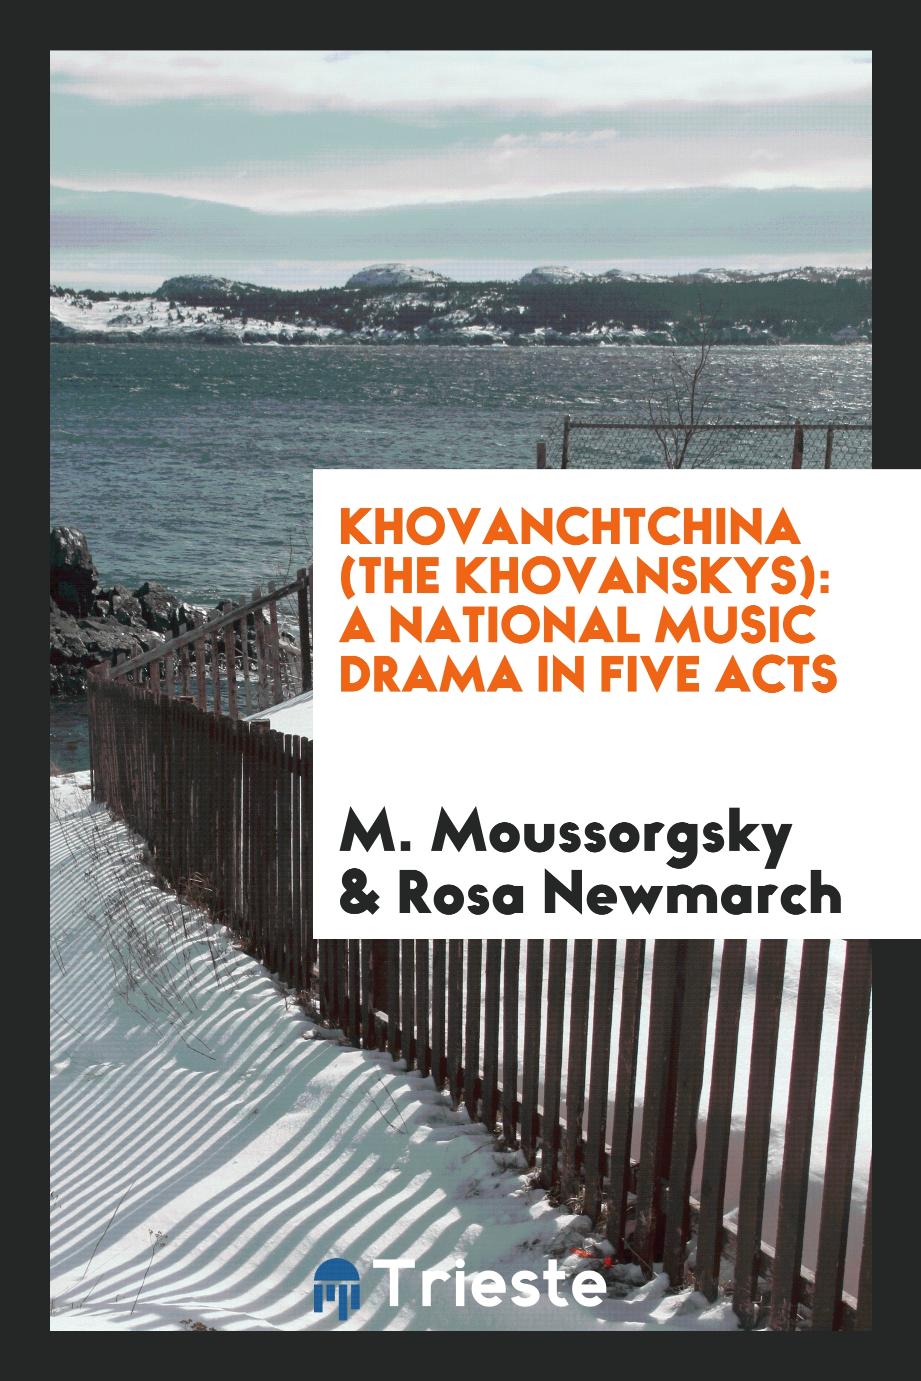 Khovanchtchina (The Khovanskys): a National Music Drama in Five Acts